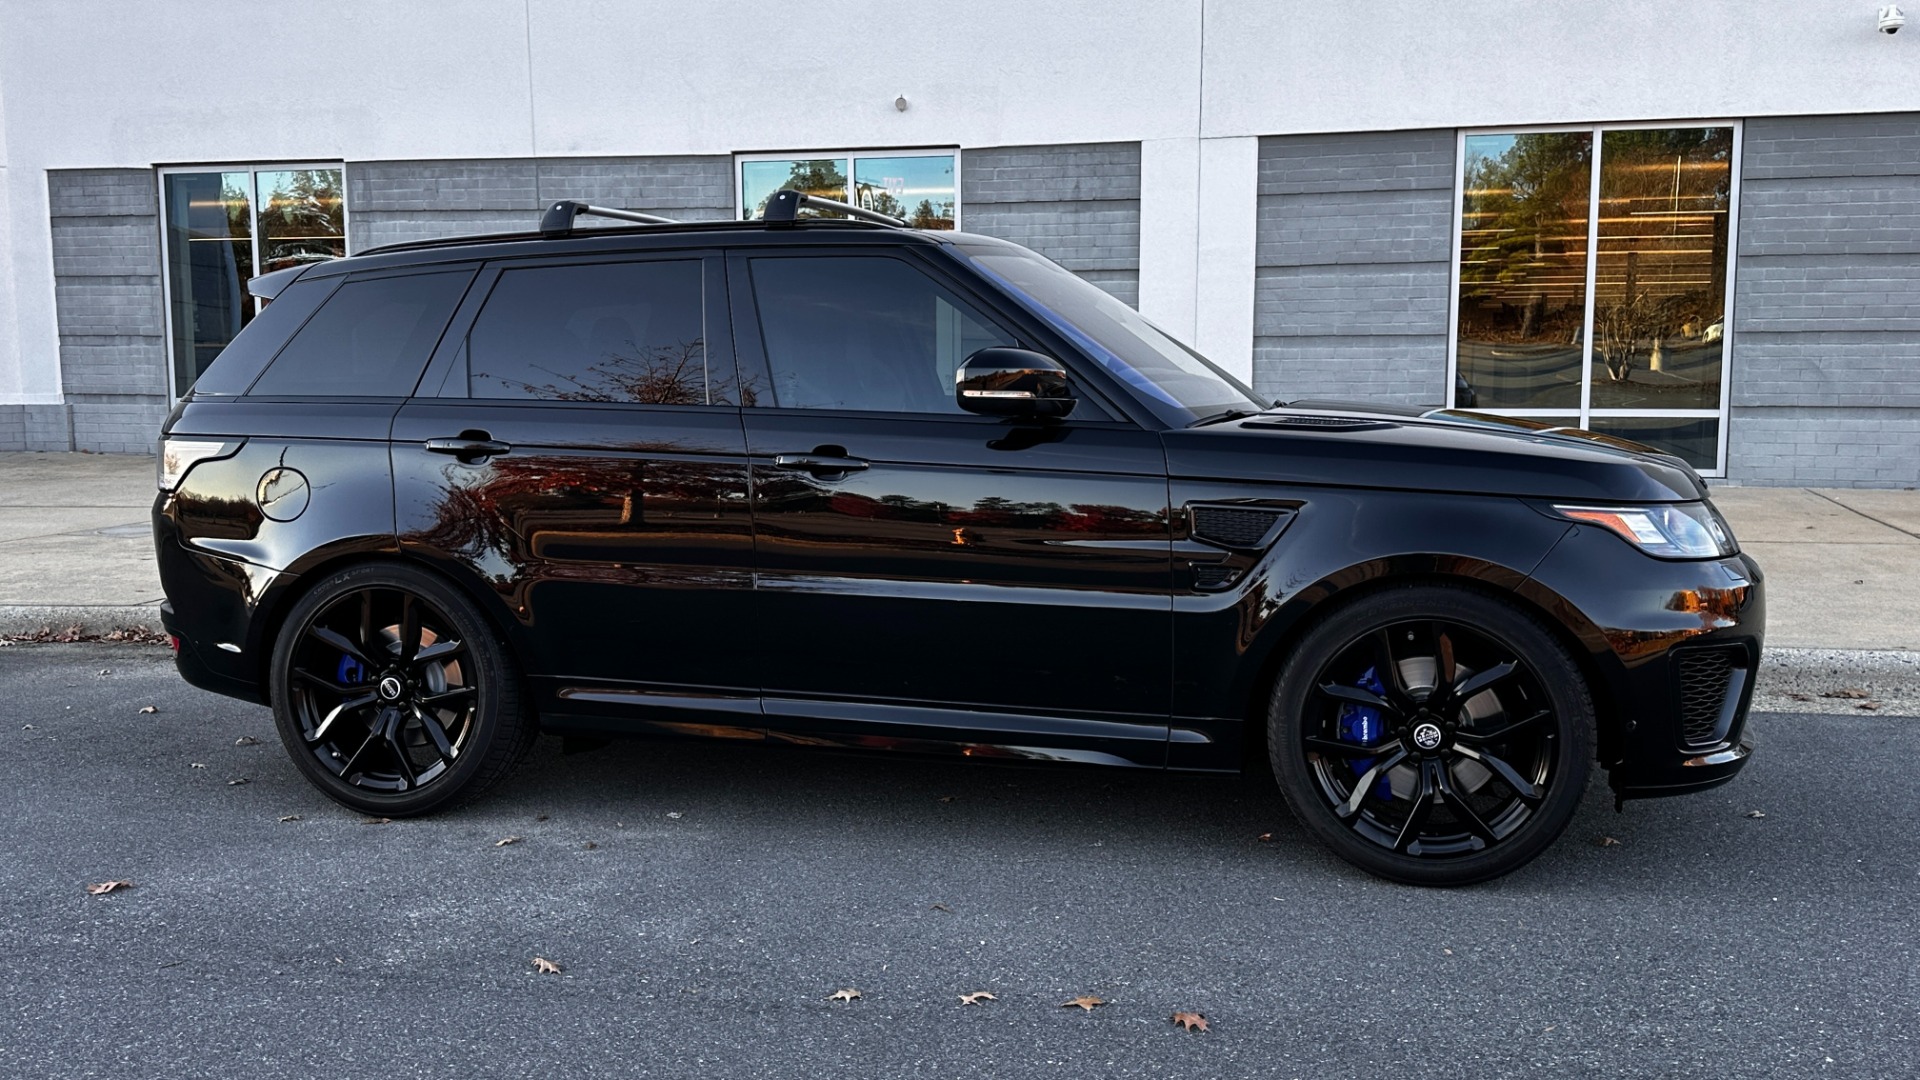 Used 2017 Land Rover Range Rover Sport SVR / DRIVE PRO PACKAGE / MERIDIAN SURROUND SOUND / SUPERCHARGED V8 / PANOR for sale Sold at Formula Imports in Charlotte NC 28227 2